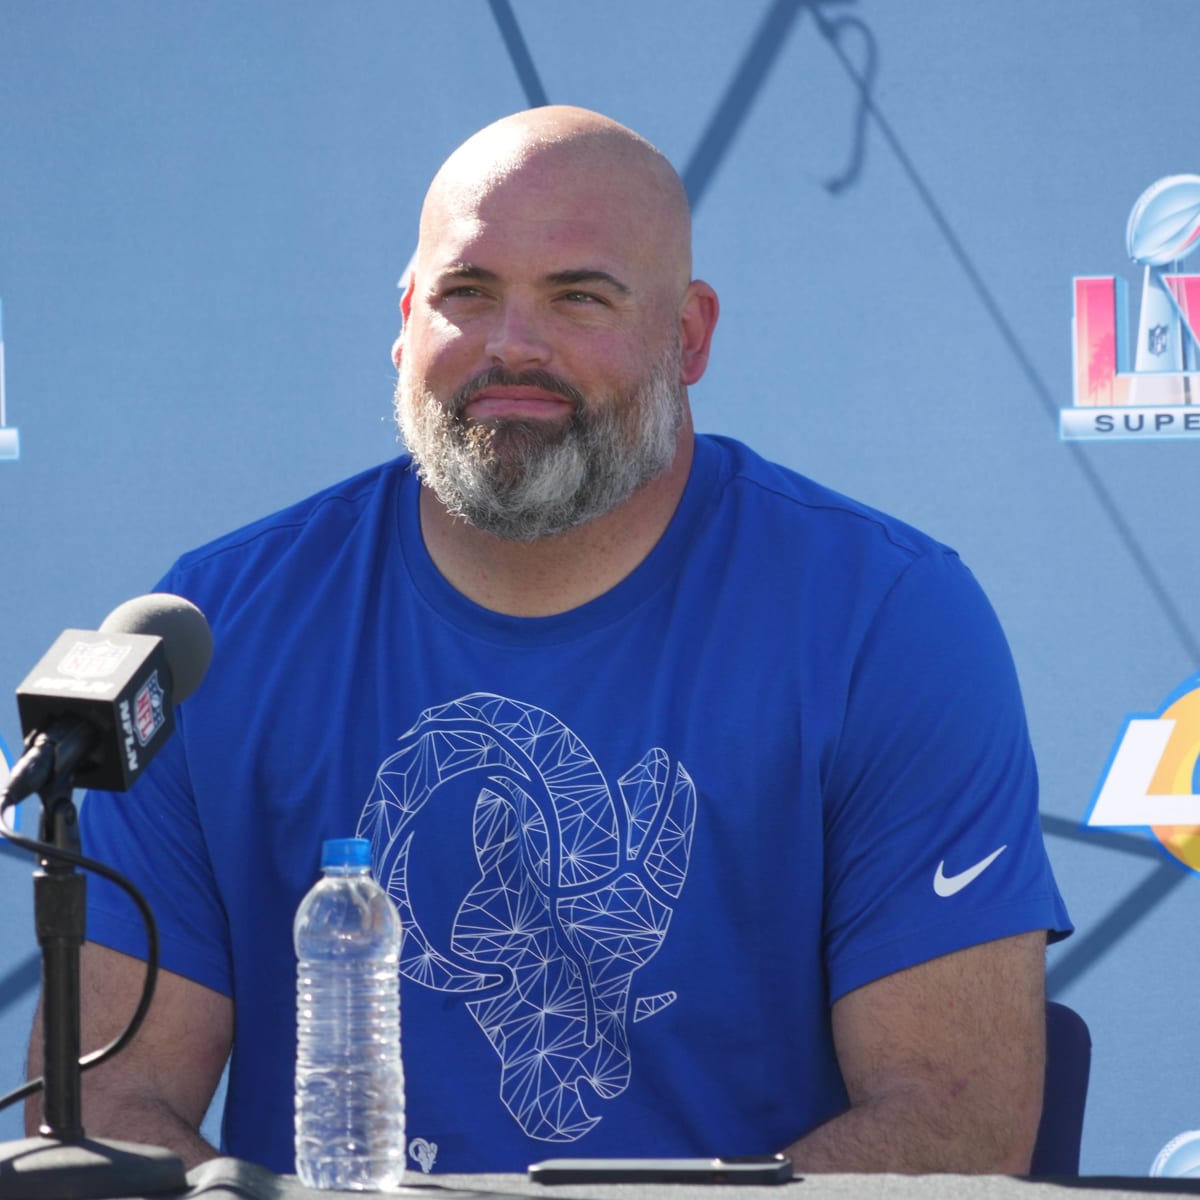 Andrew Whitworth Nominated for Walter Payton NFL Man of the Year Award